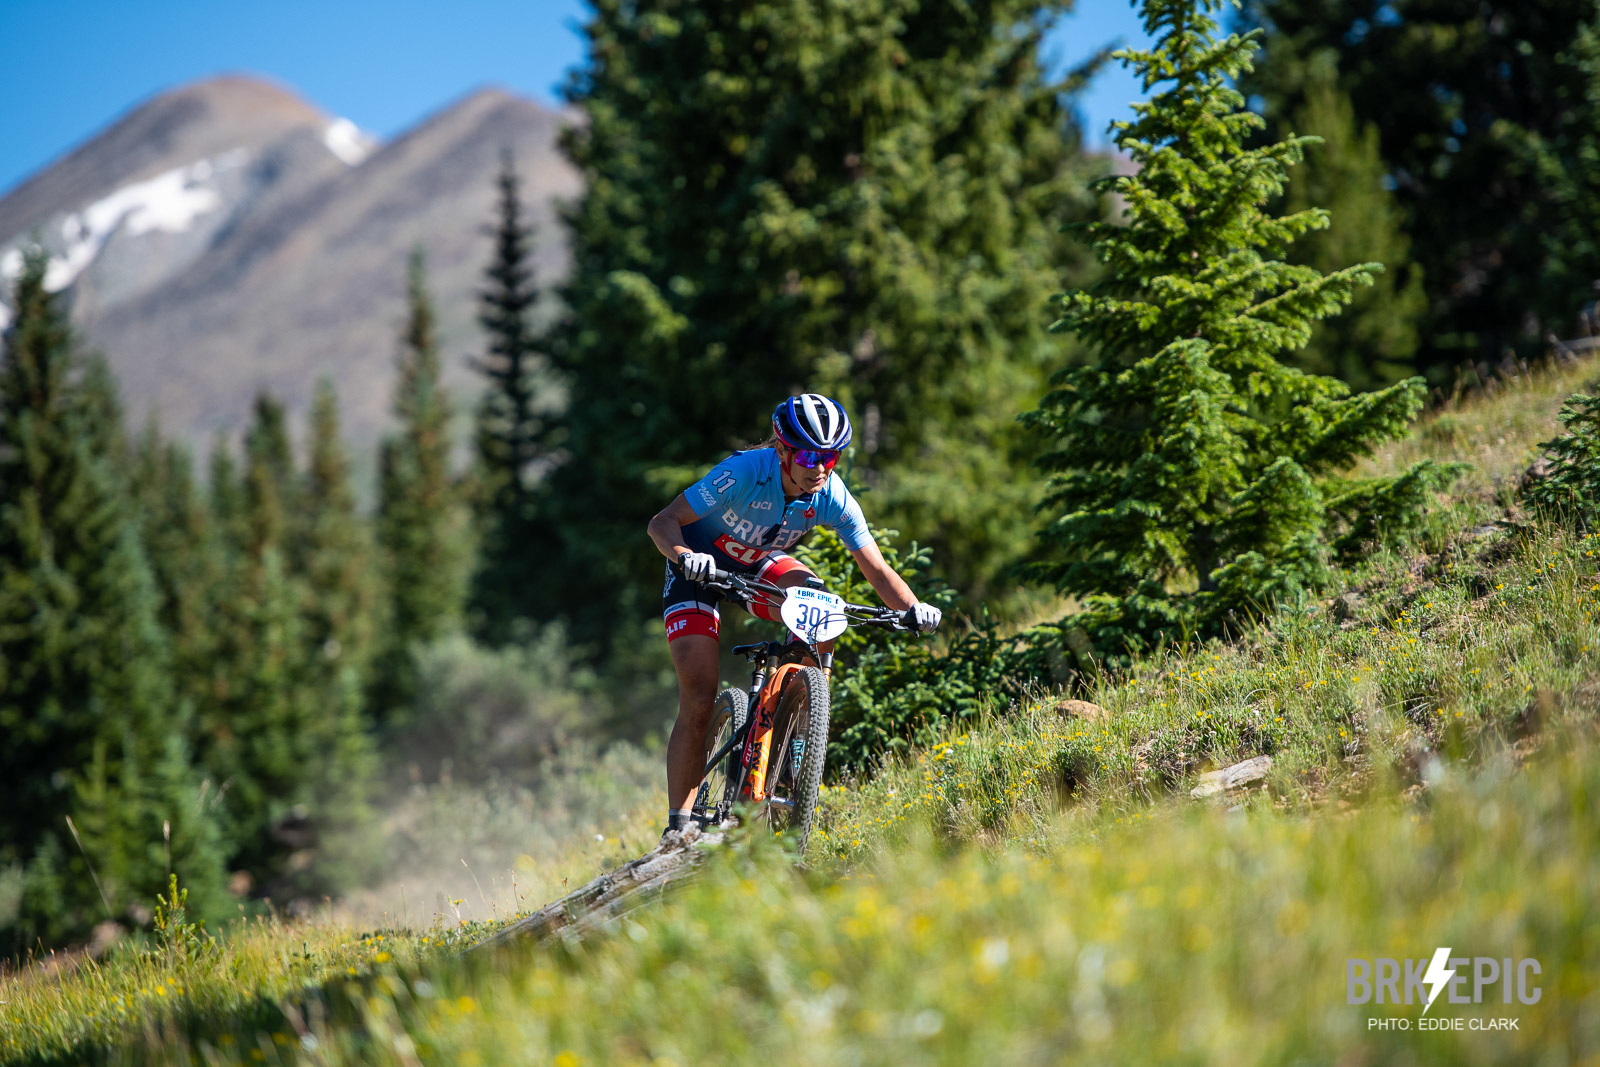 The Breck Epic's finale on Day 6. Katerina Nash the overall winner of the 6-stage race for the women raced strong all week.
Photo: Eddie Clark